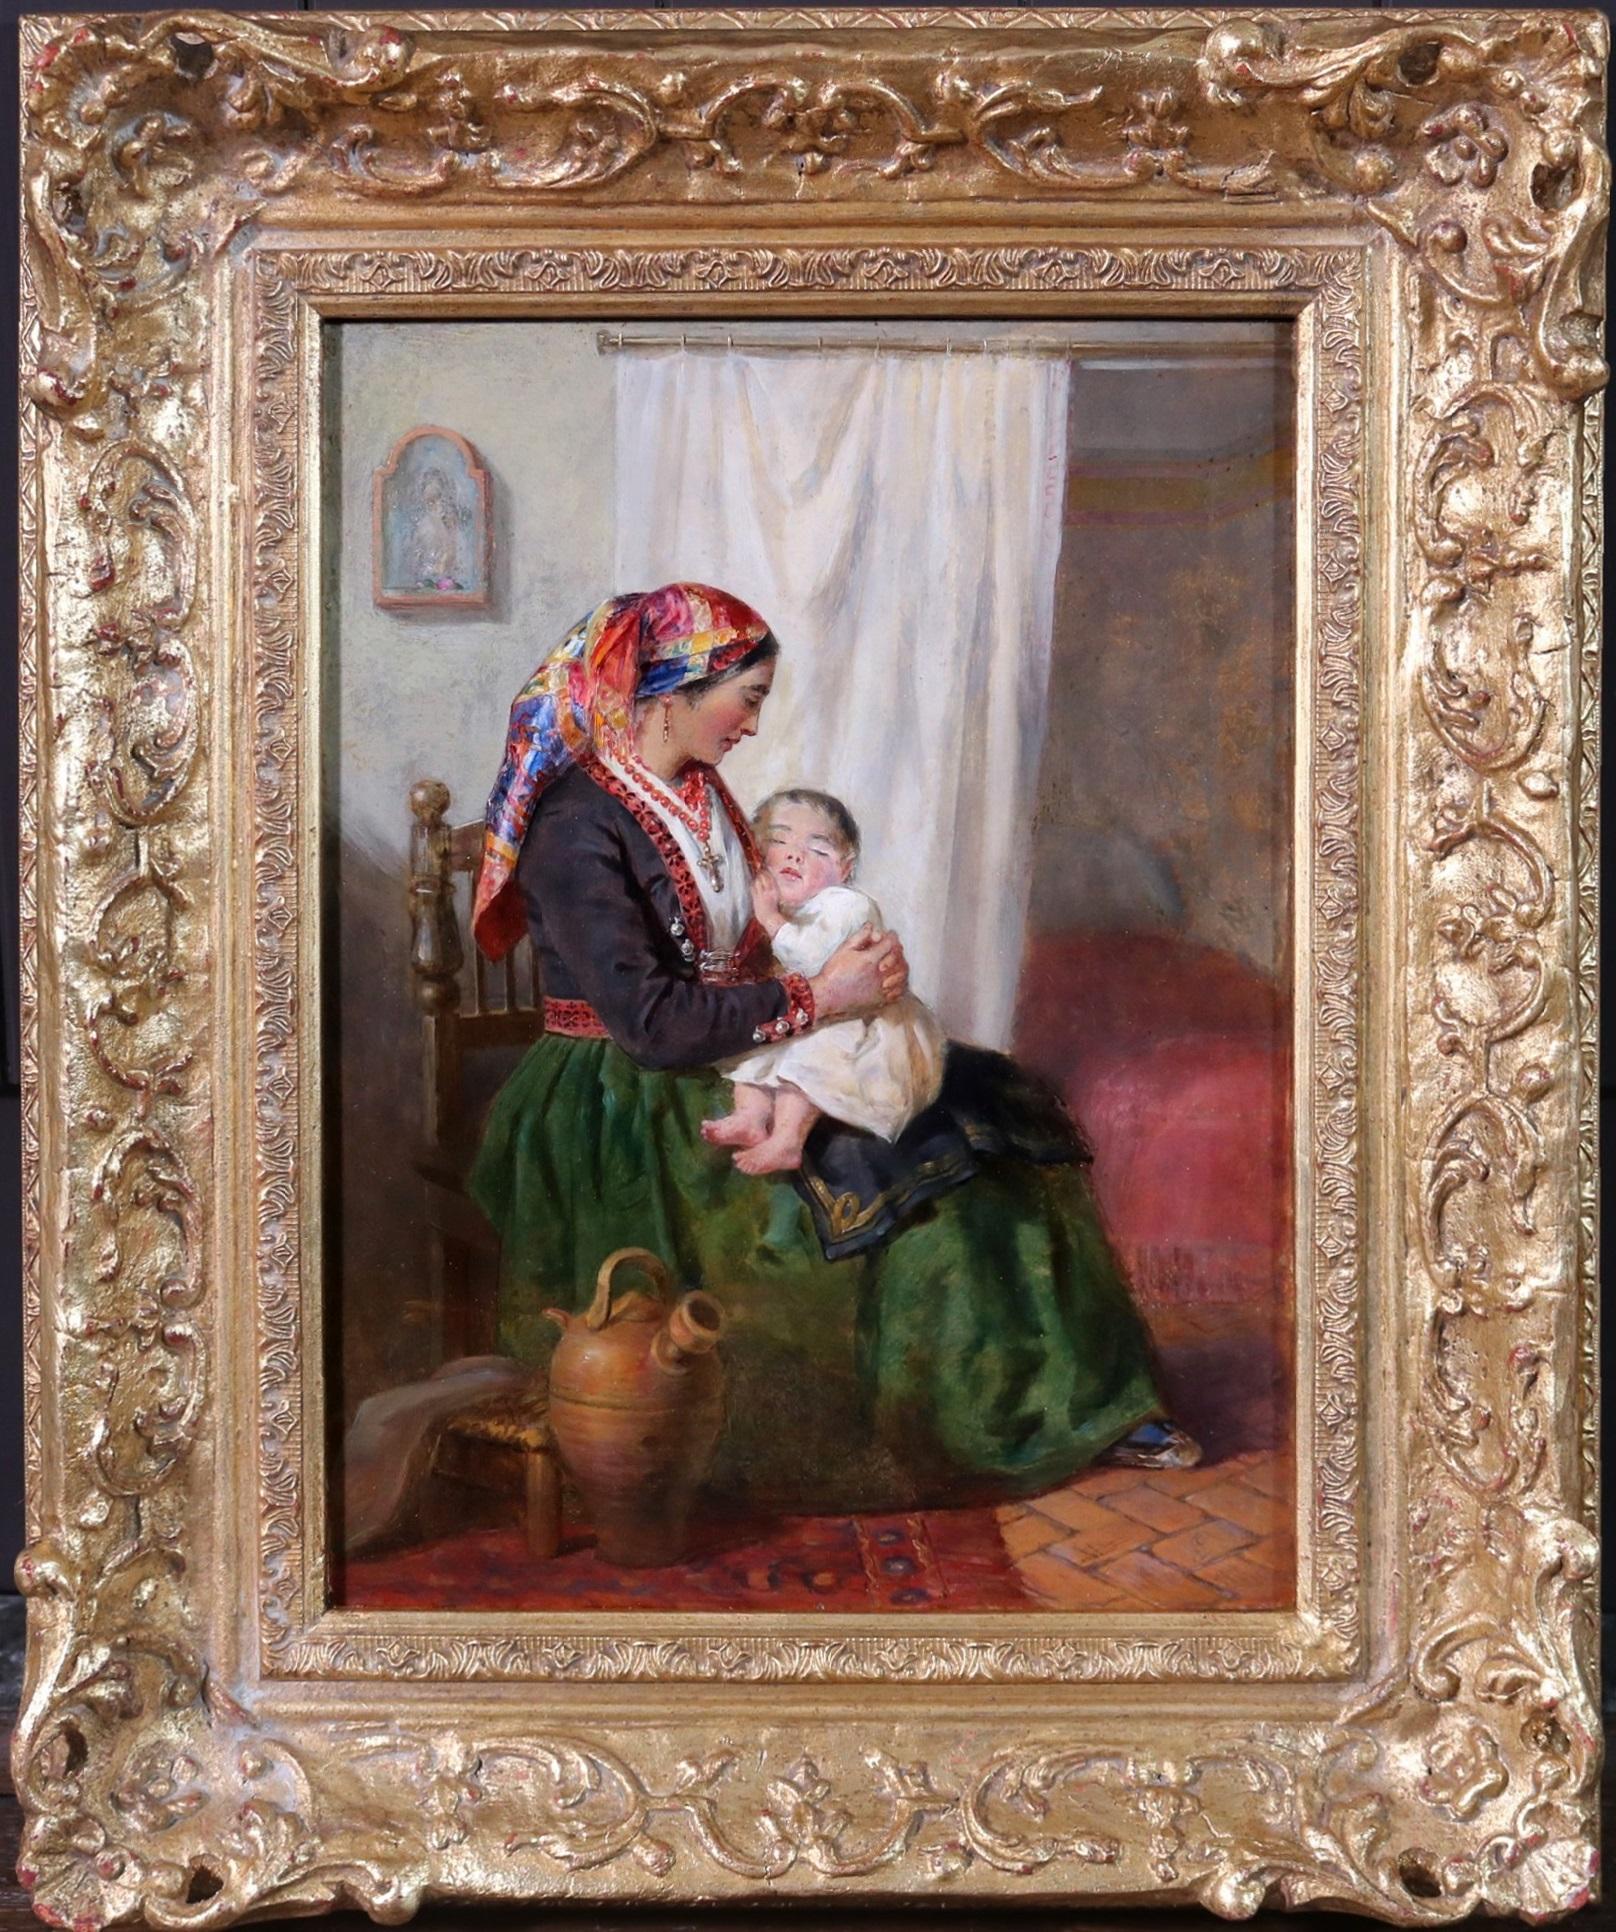 The Nurse Maid - 19th Century Orientalist Oil Painting of Spanish Family Scene - Brown Figurative Painting by Edwin Long